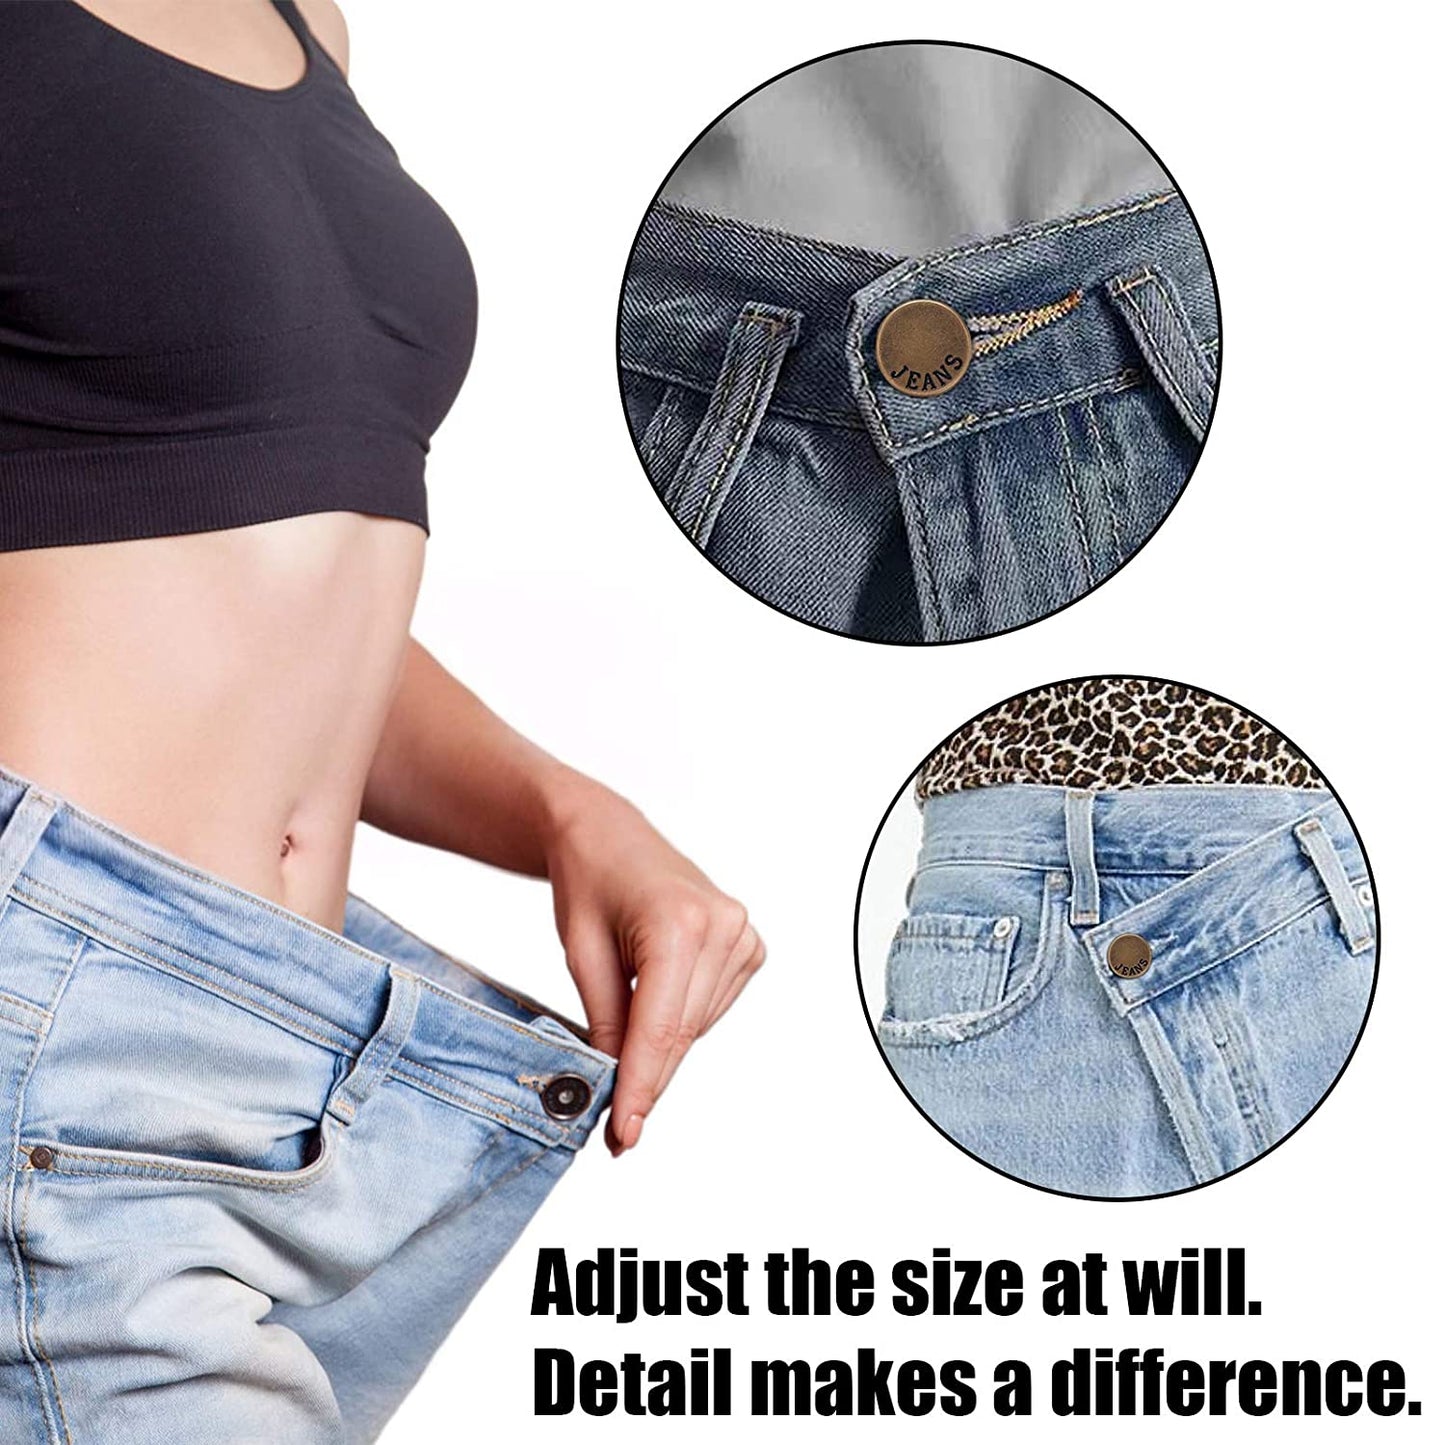 TOOVREN Upgraded 8 Sets Button Pins for Jeans Pants, No Sew Perfect Fit Jean Button Tightener Replacement Adjustable Reusable Metal Clips Snap Tack, Instant Reduce Too Big Pants Waist